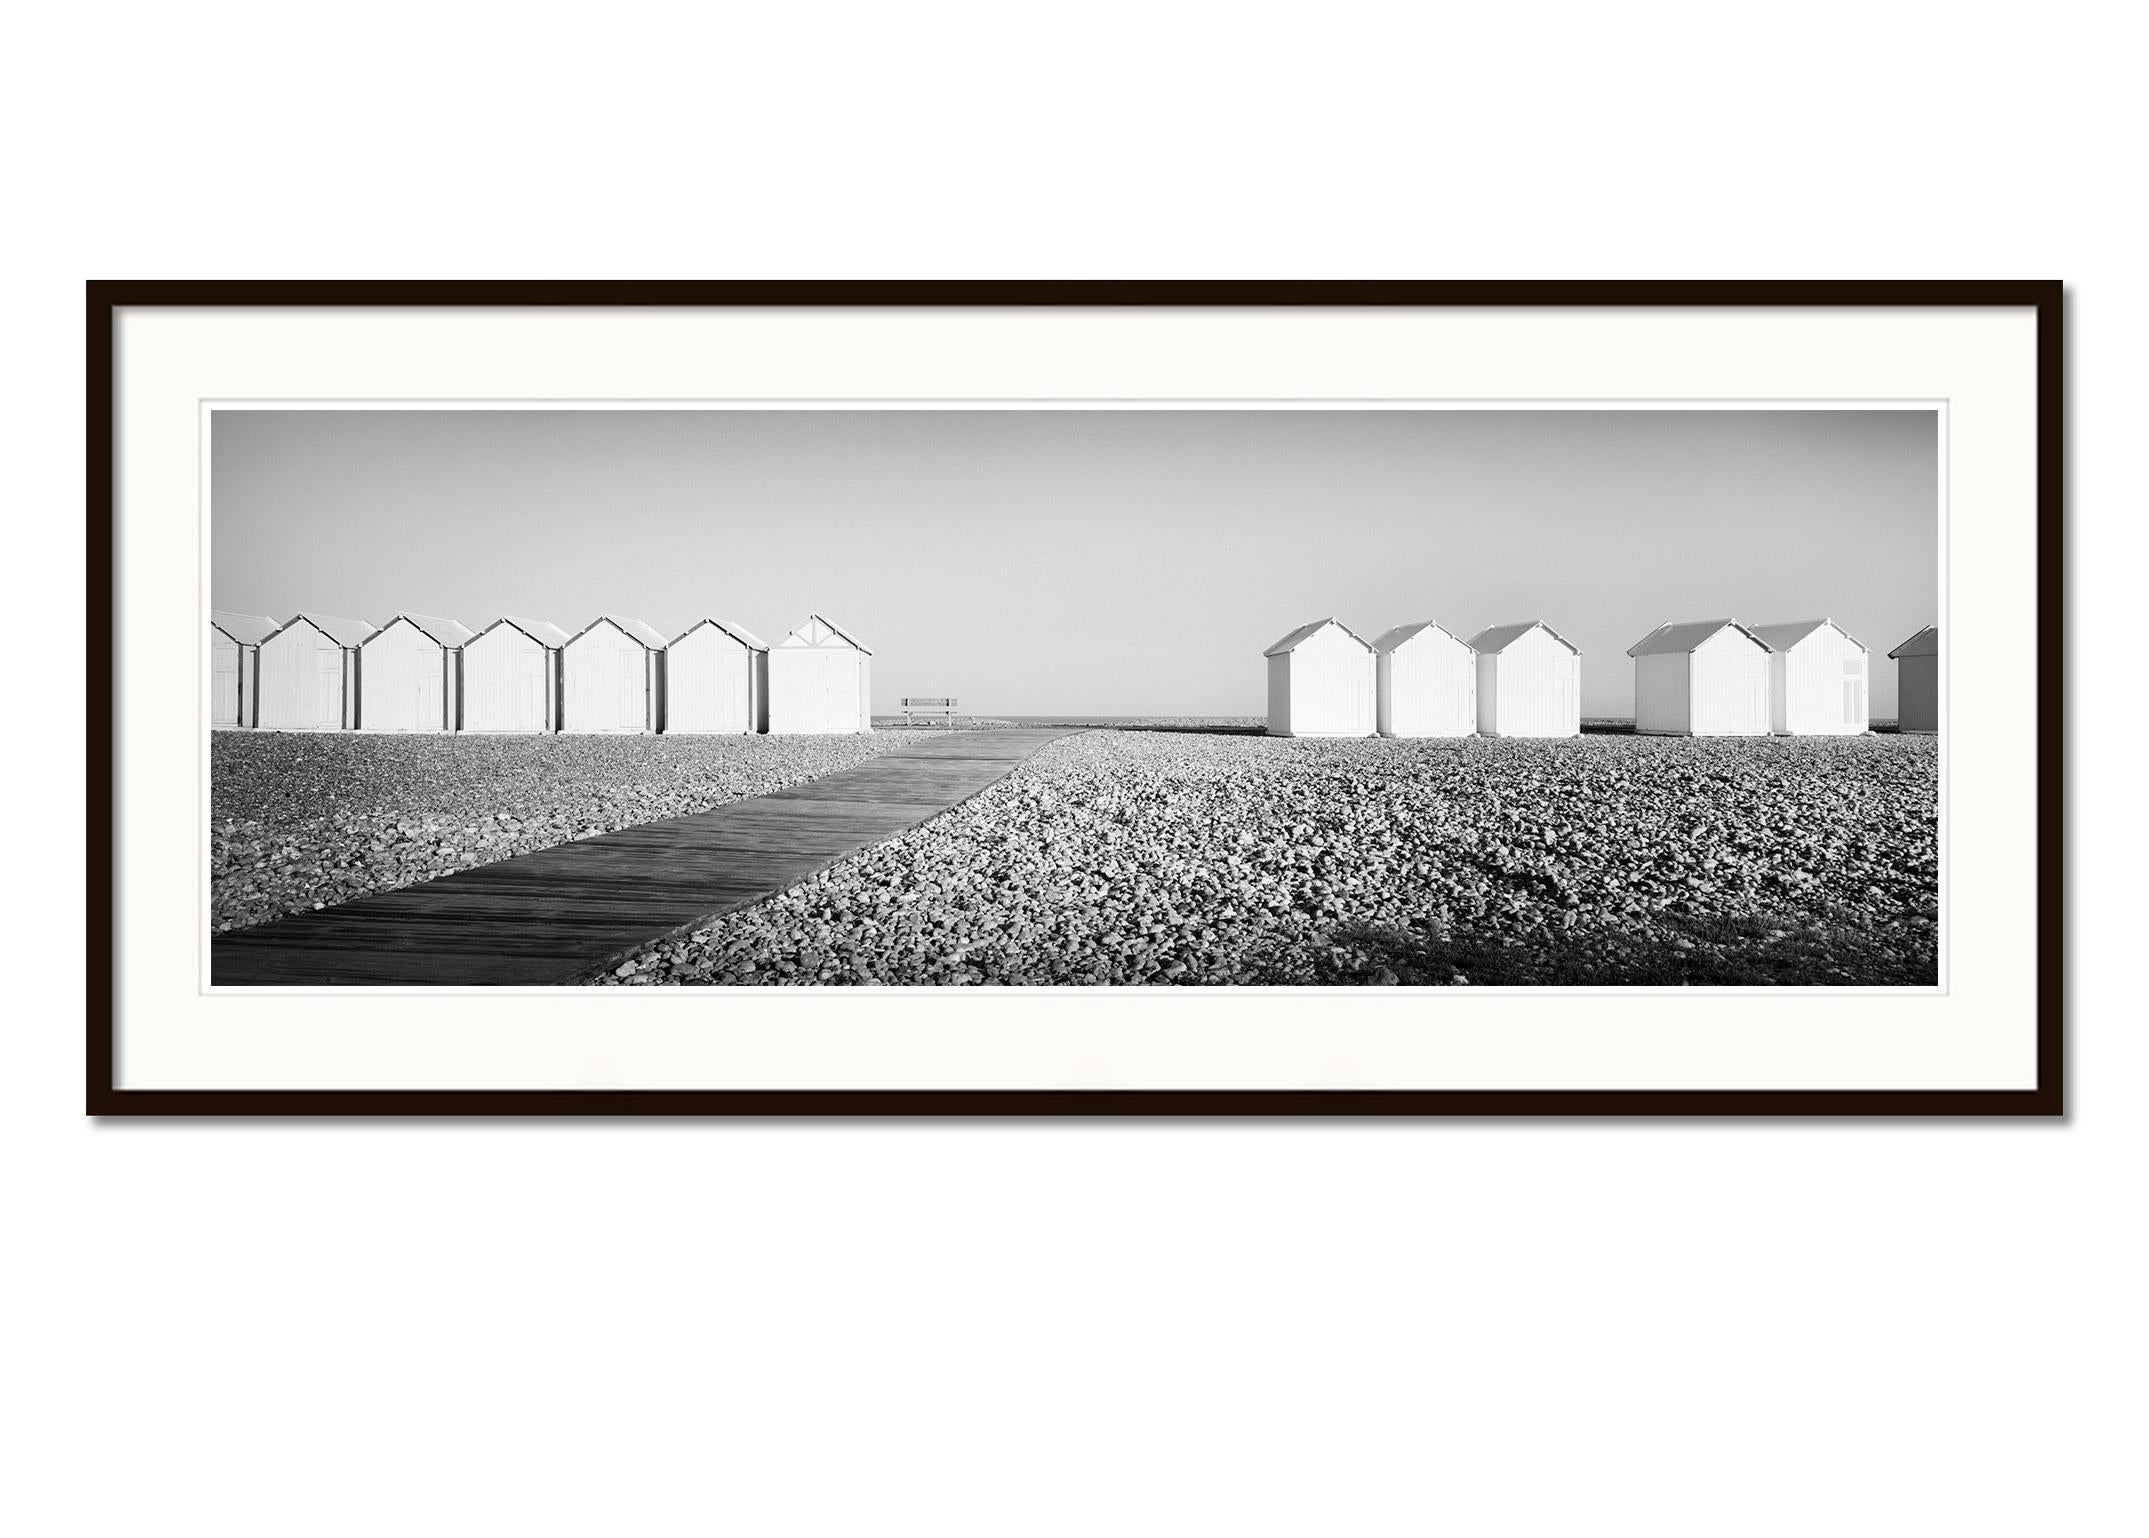 Beach Huts Panorama, bench, stones, France, black & white landscape photography - Gray Landscape Photograph by Gerald Berghammer